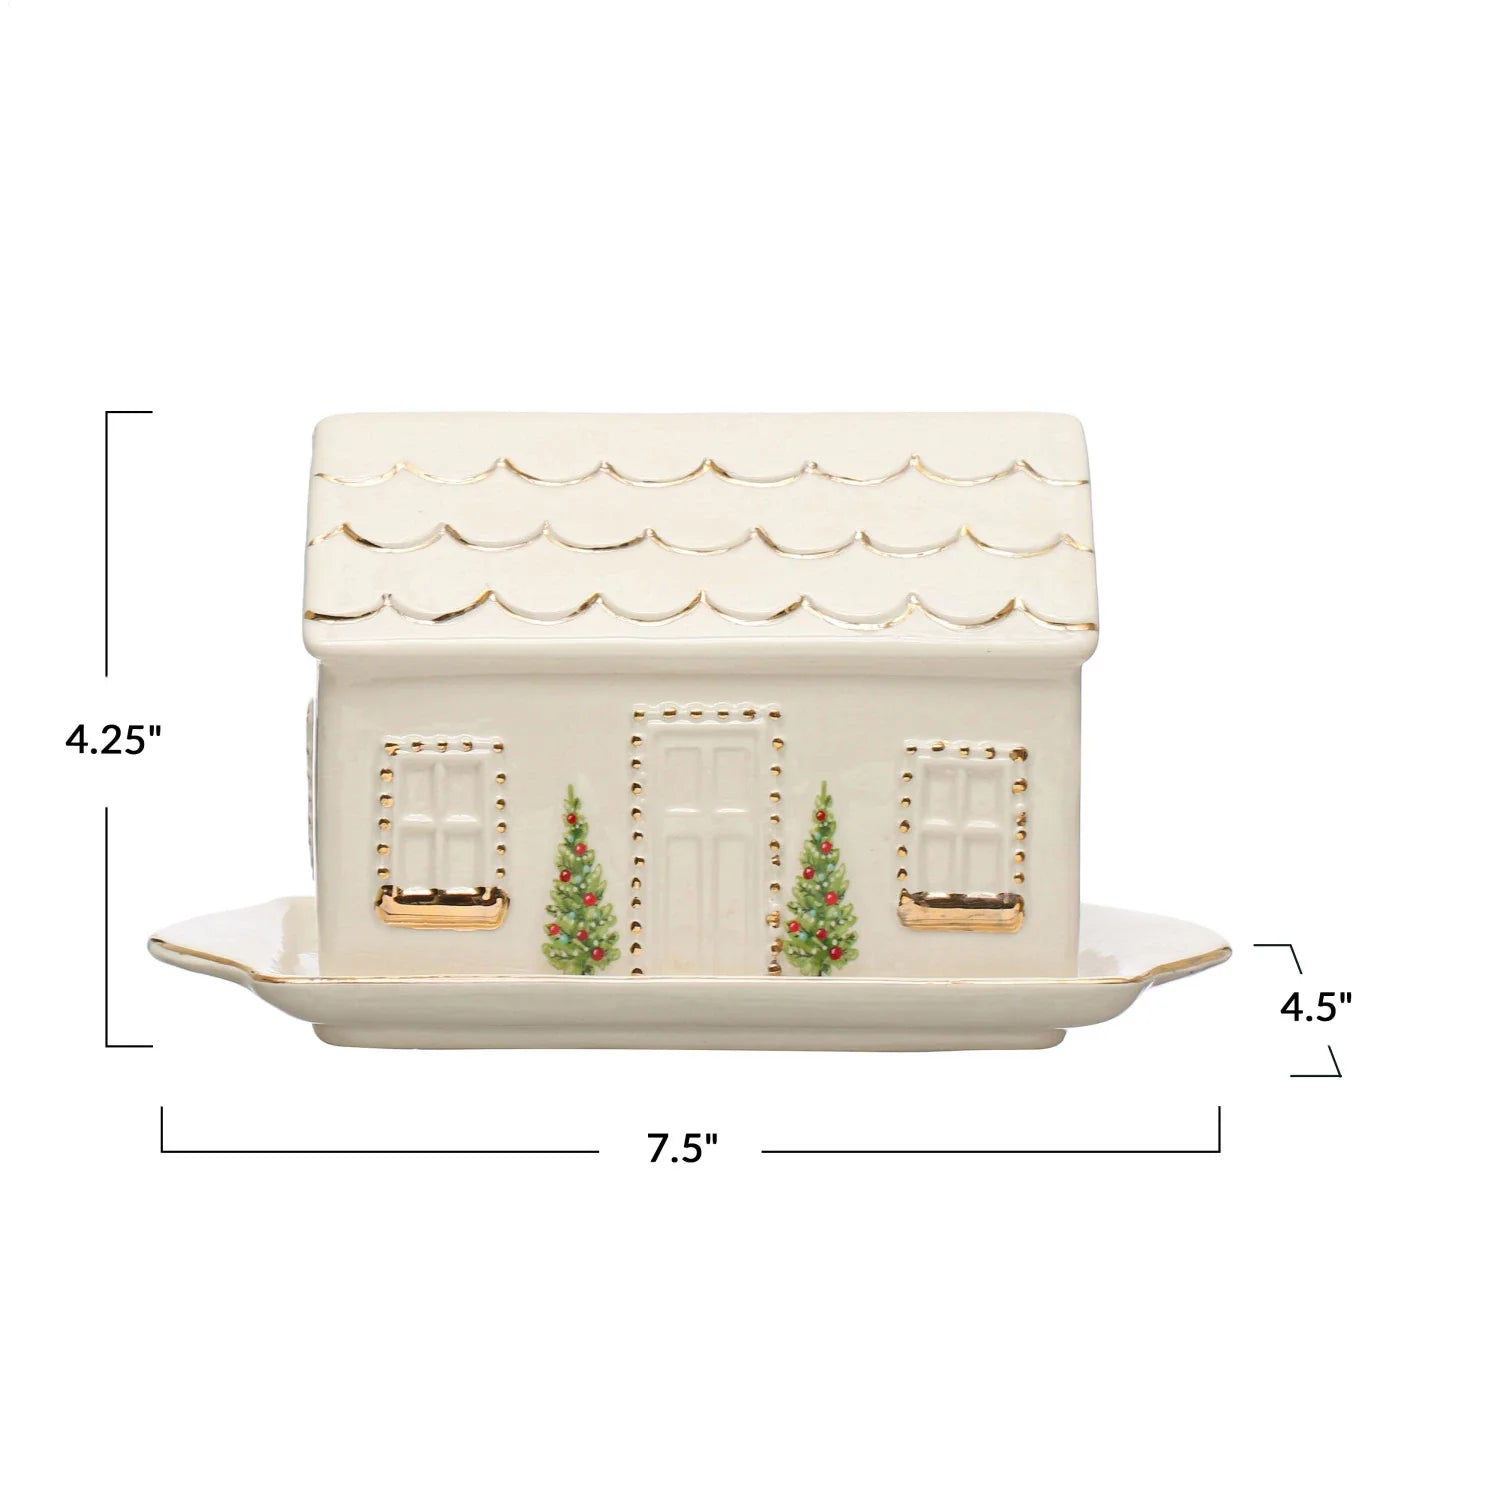 Hand-Painted House Butter Dish